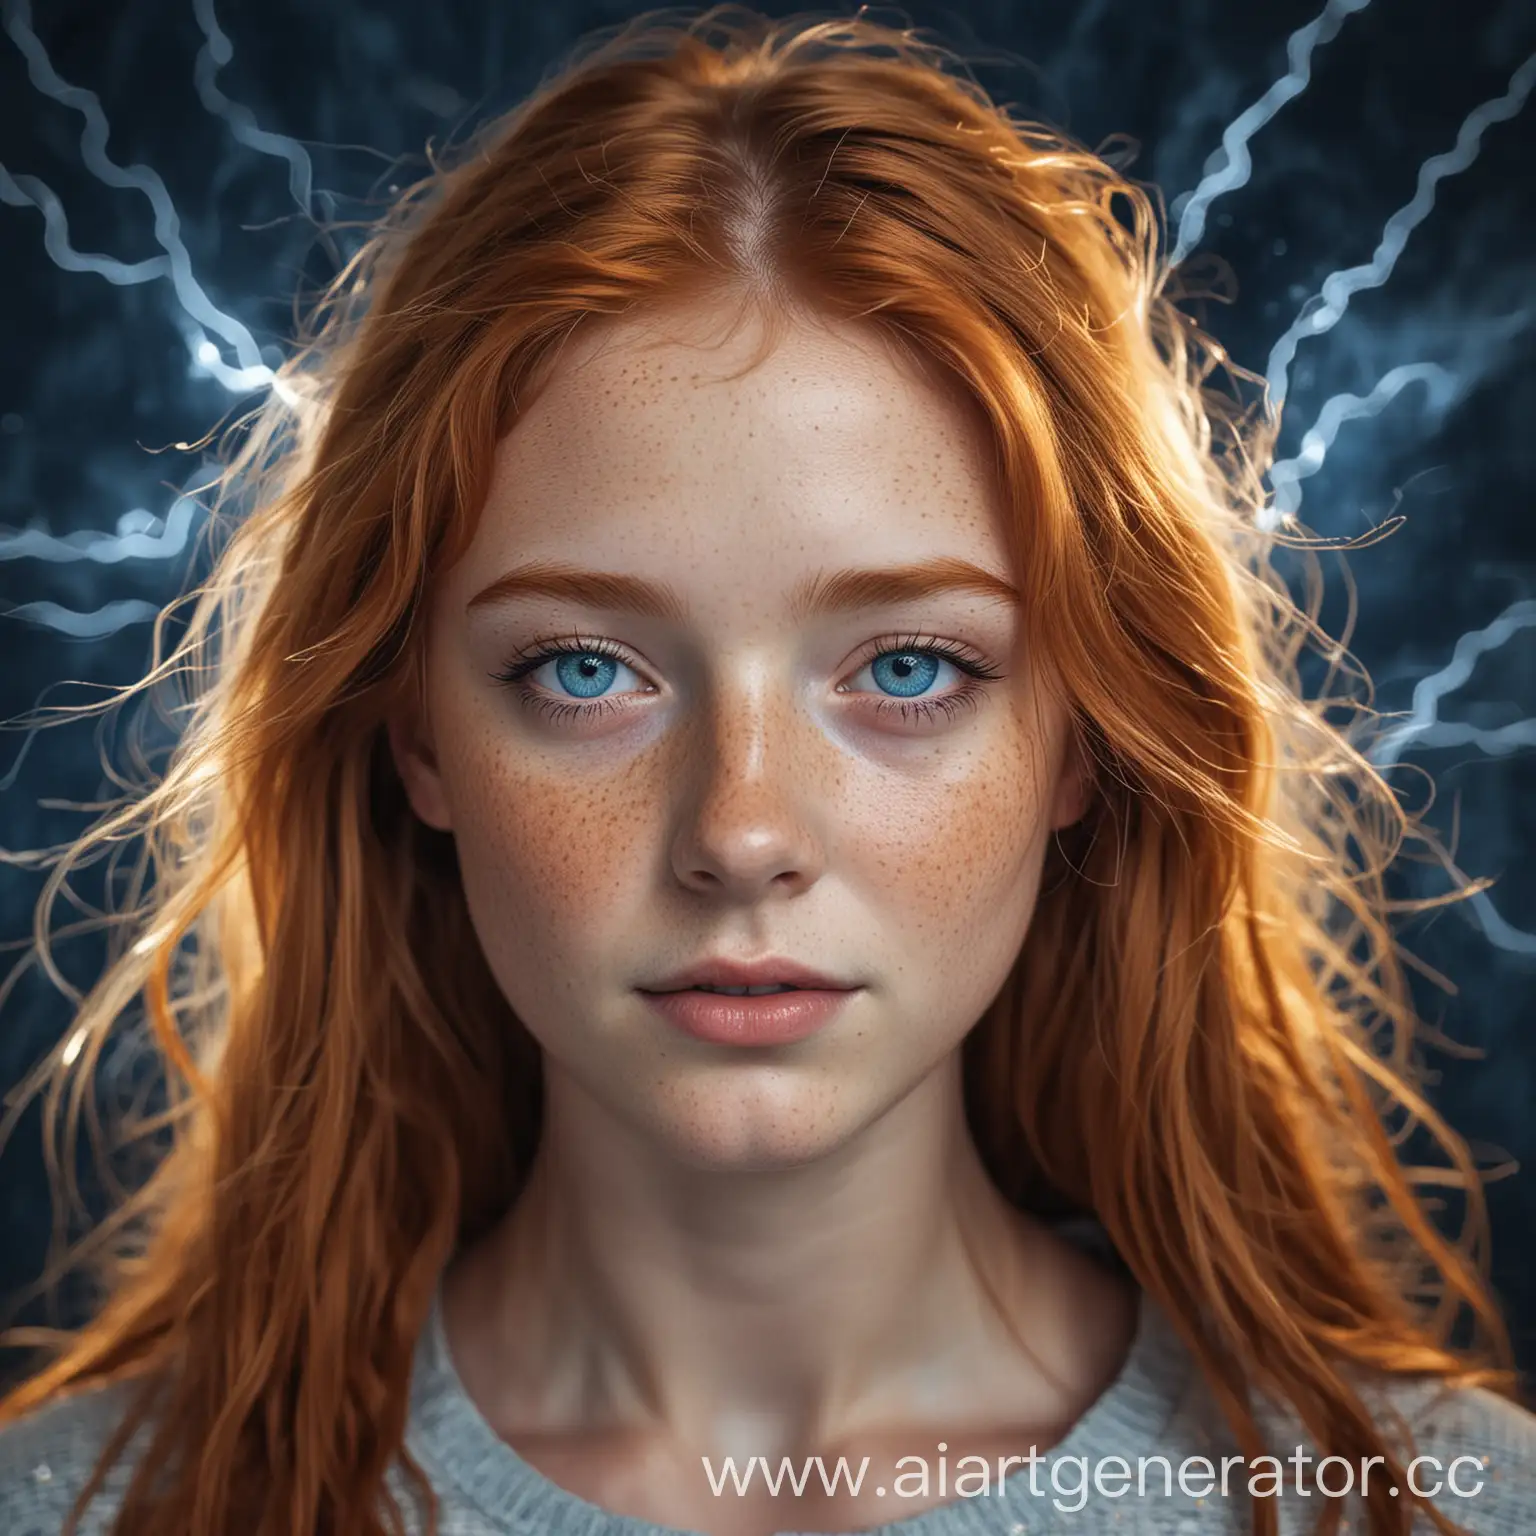 GingerHaired-Girl-with-Freckles-in-Radiant-Lightning-Setting